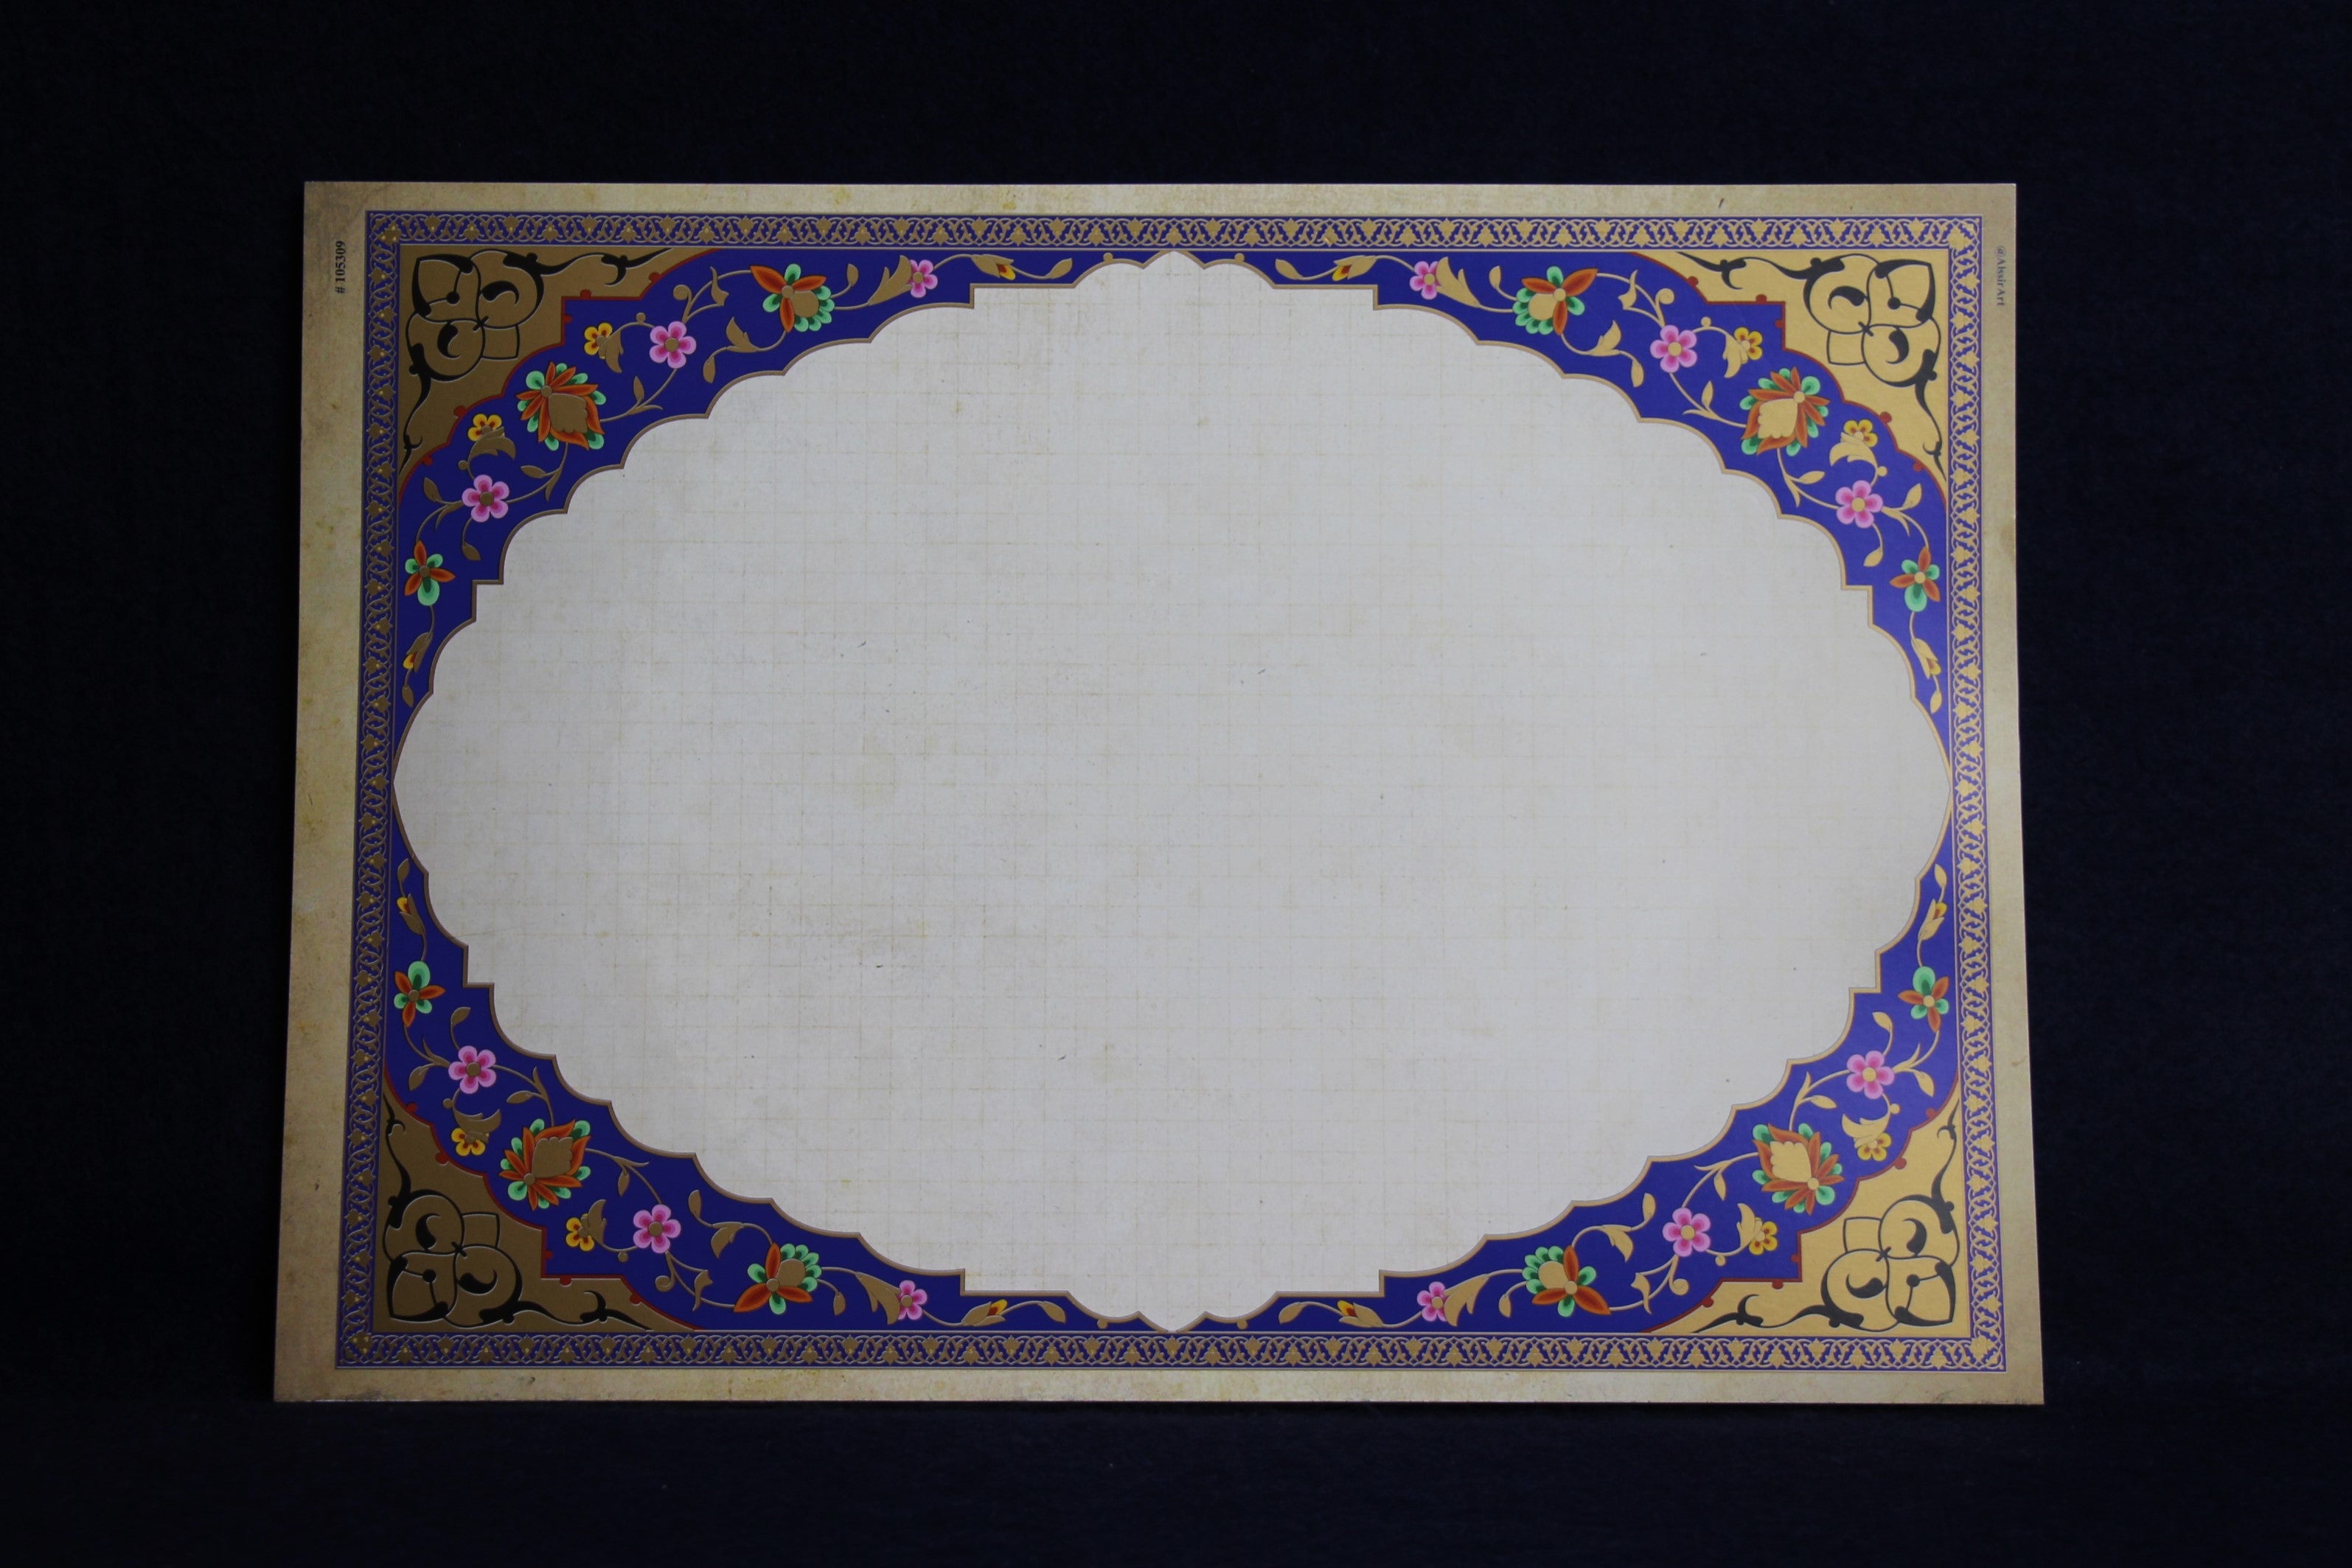 0Book of 25 leaves of semi-gloss paper for Arabic calligraphy with decorated border (a)